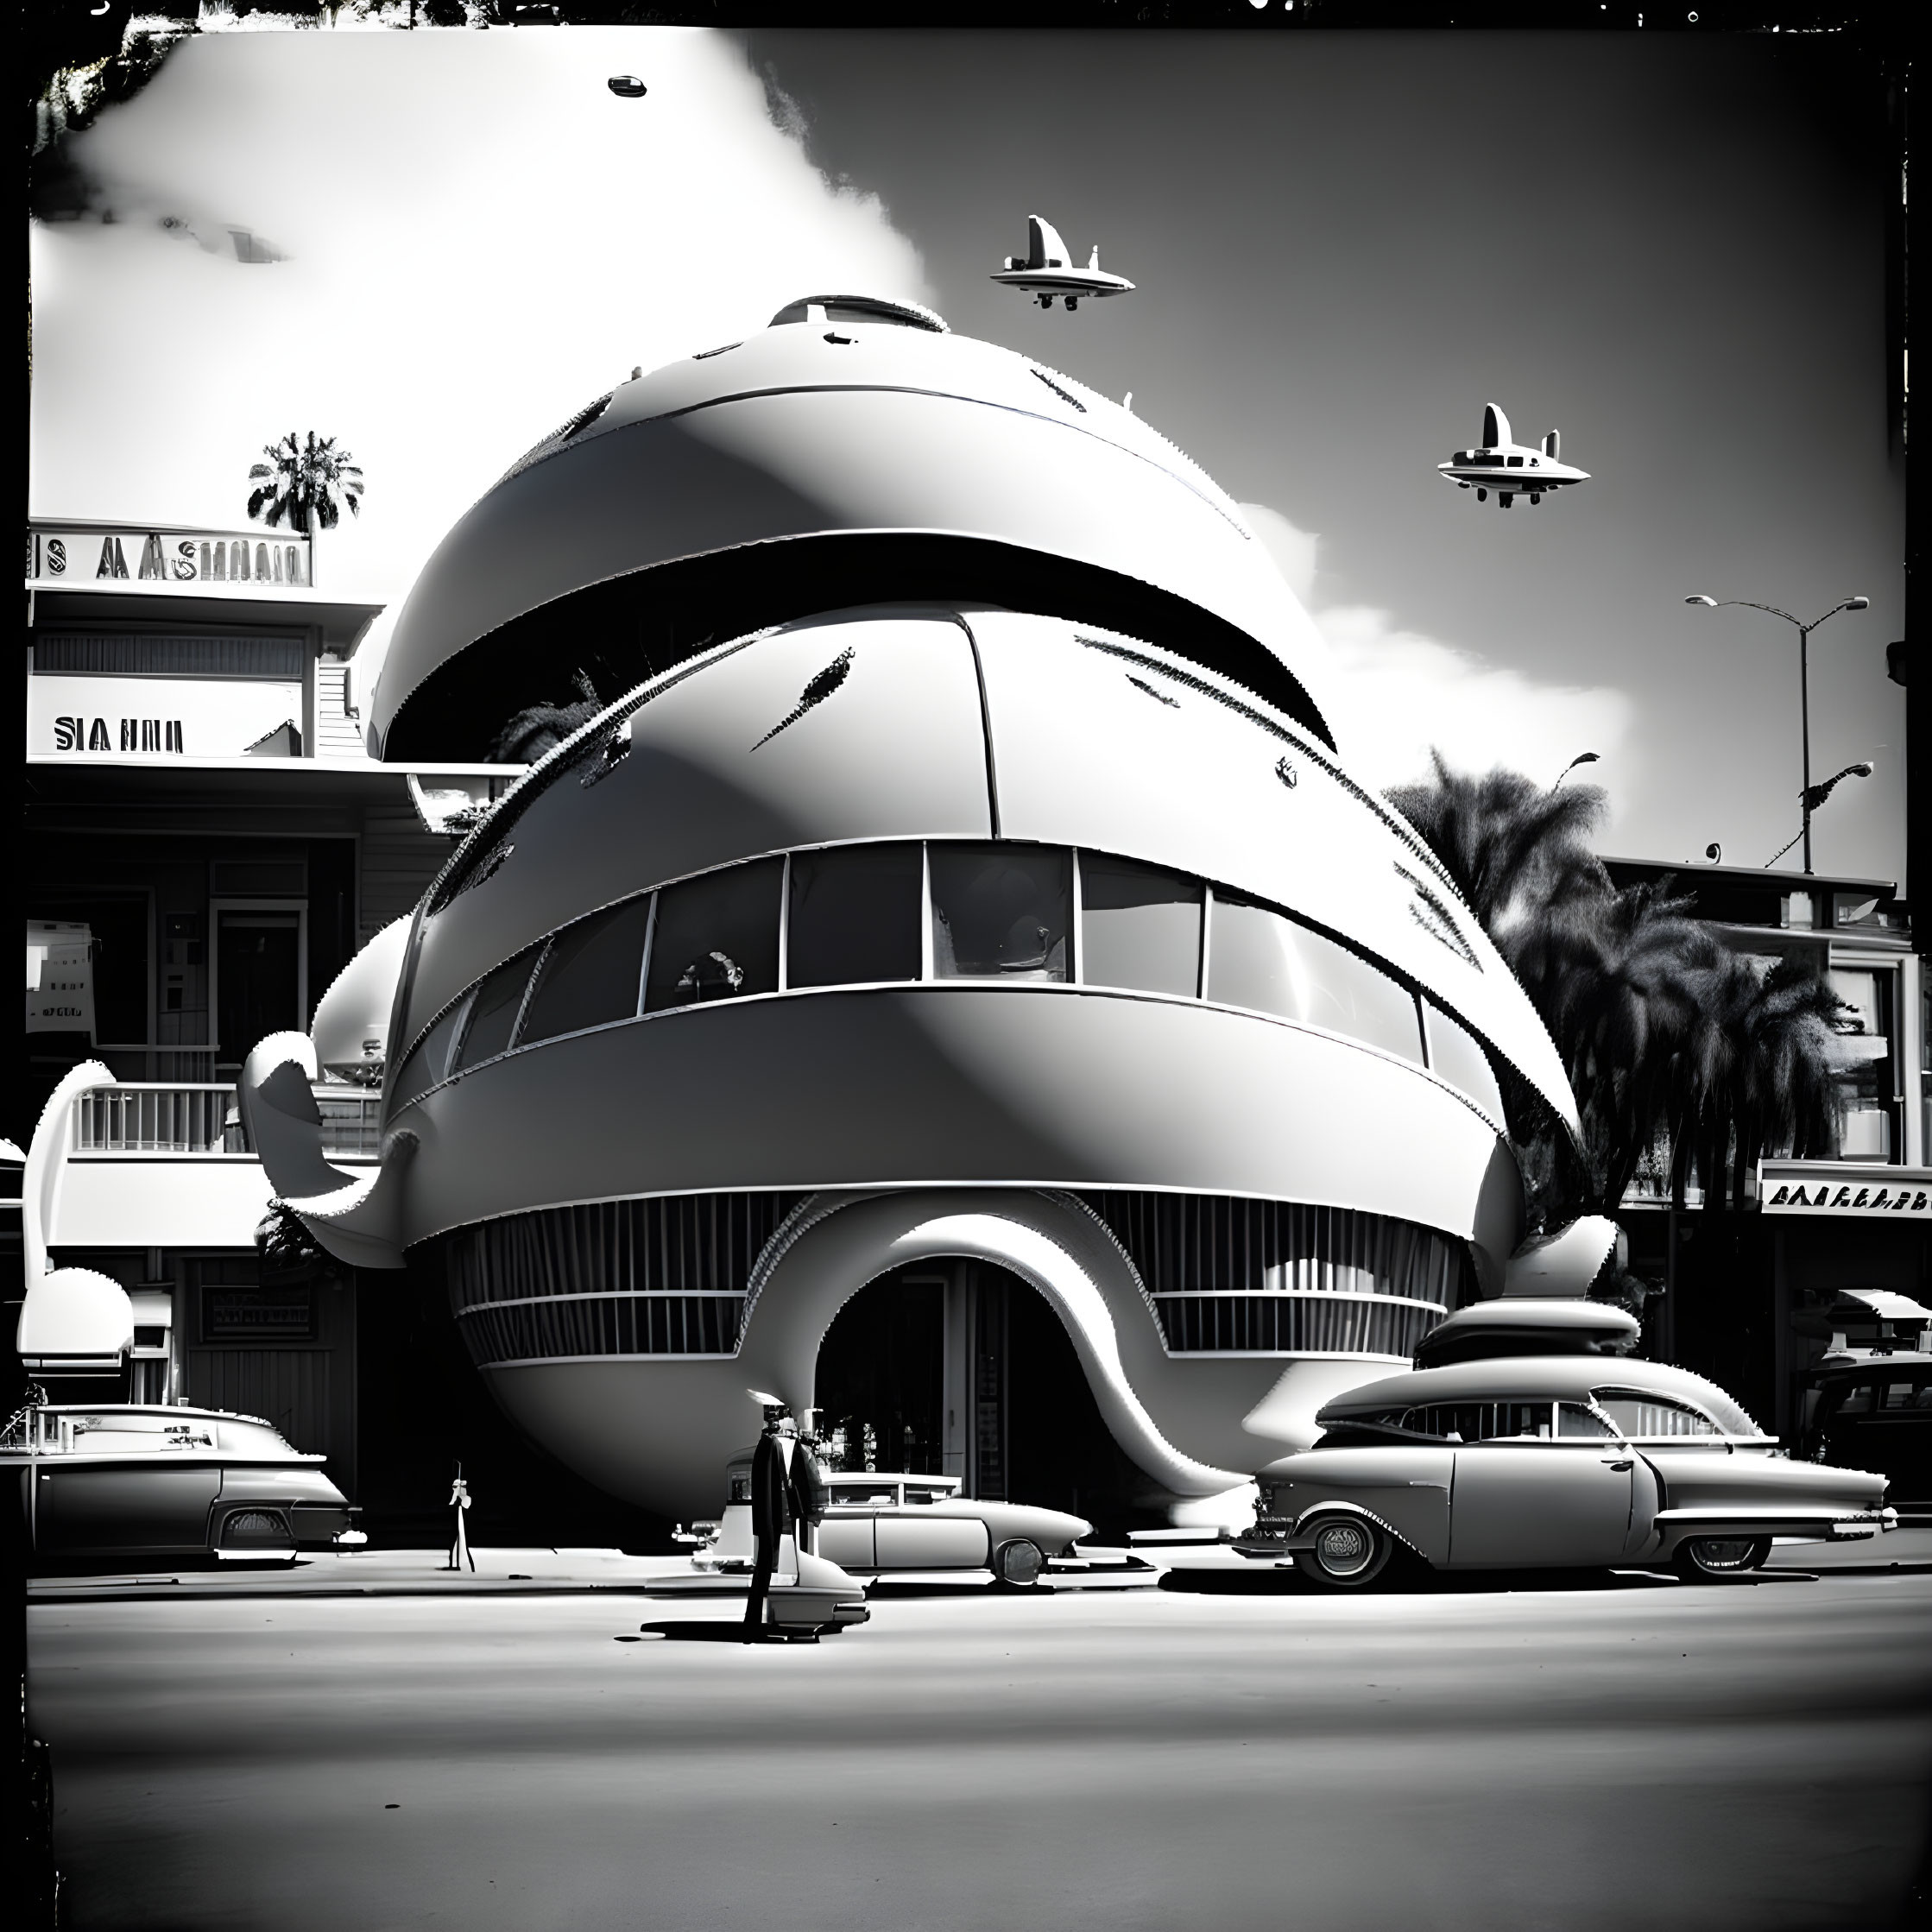 Monochrome image of retro-futuristic building with vintage cars and aircraft